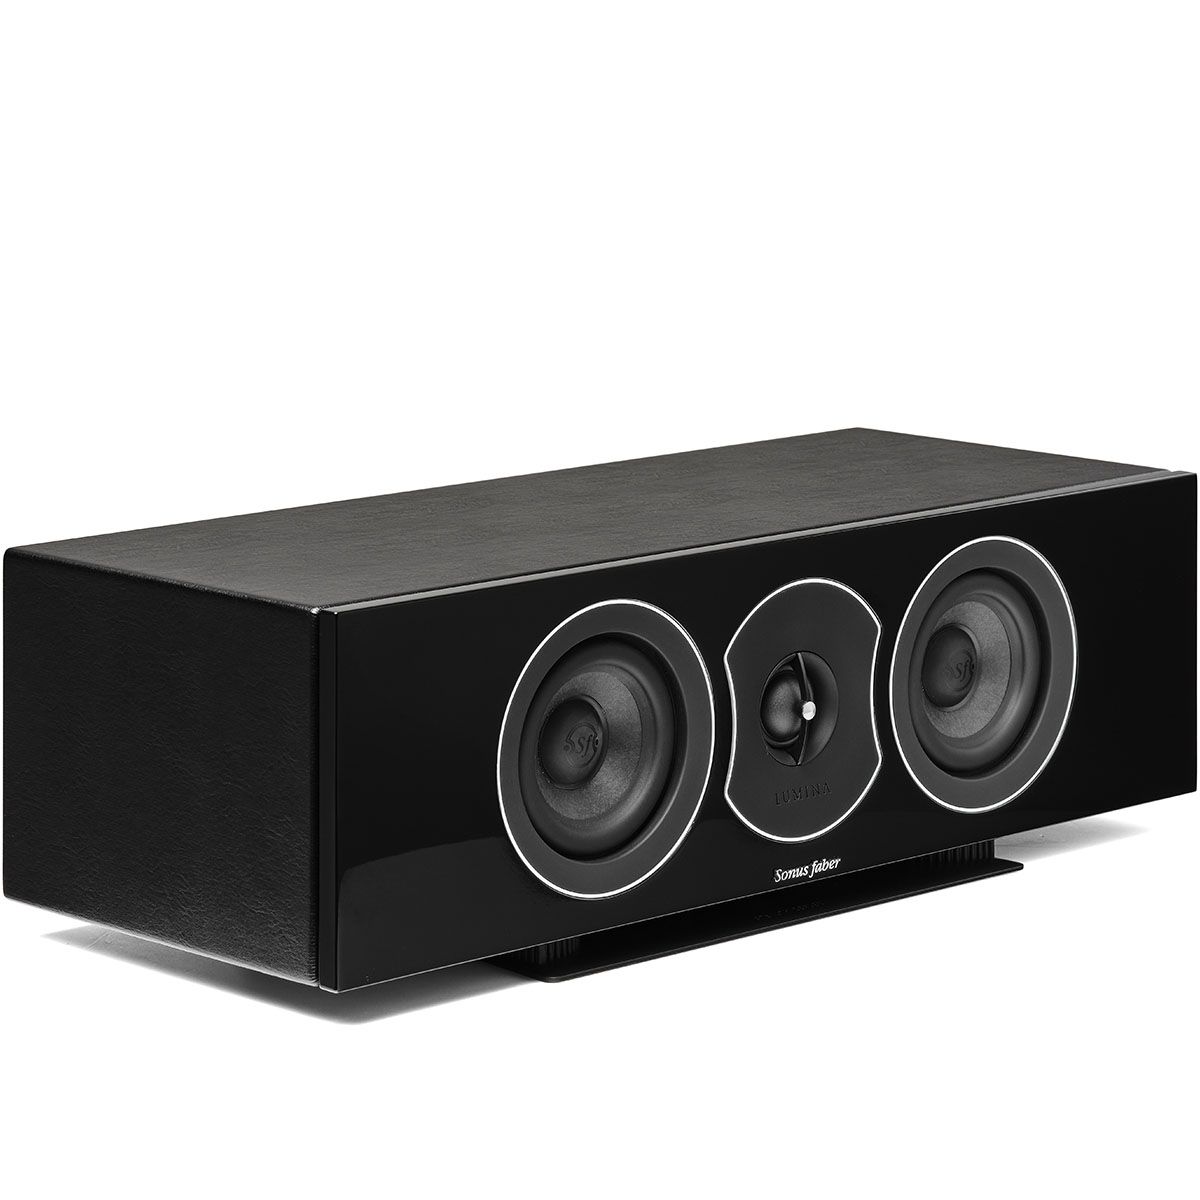 Sonus Faber Lumina Center Channel Speaker - Black - angled front view without grille